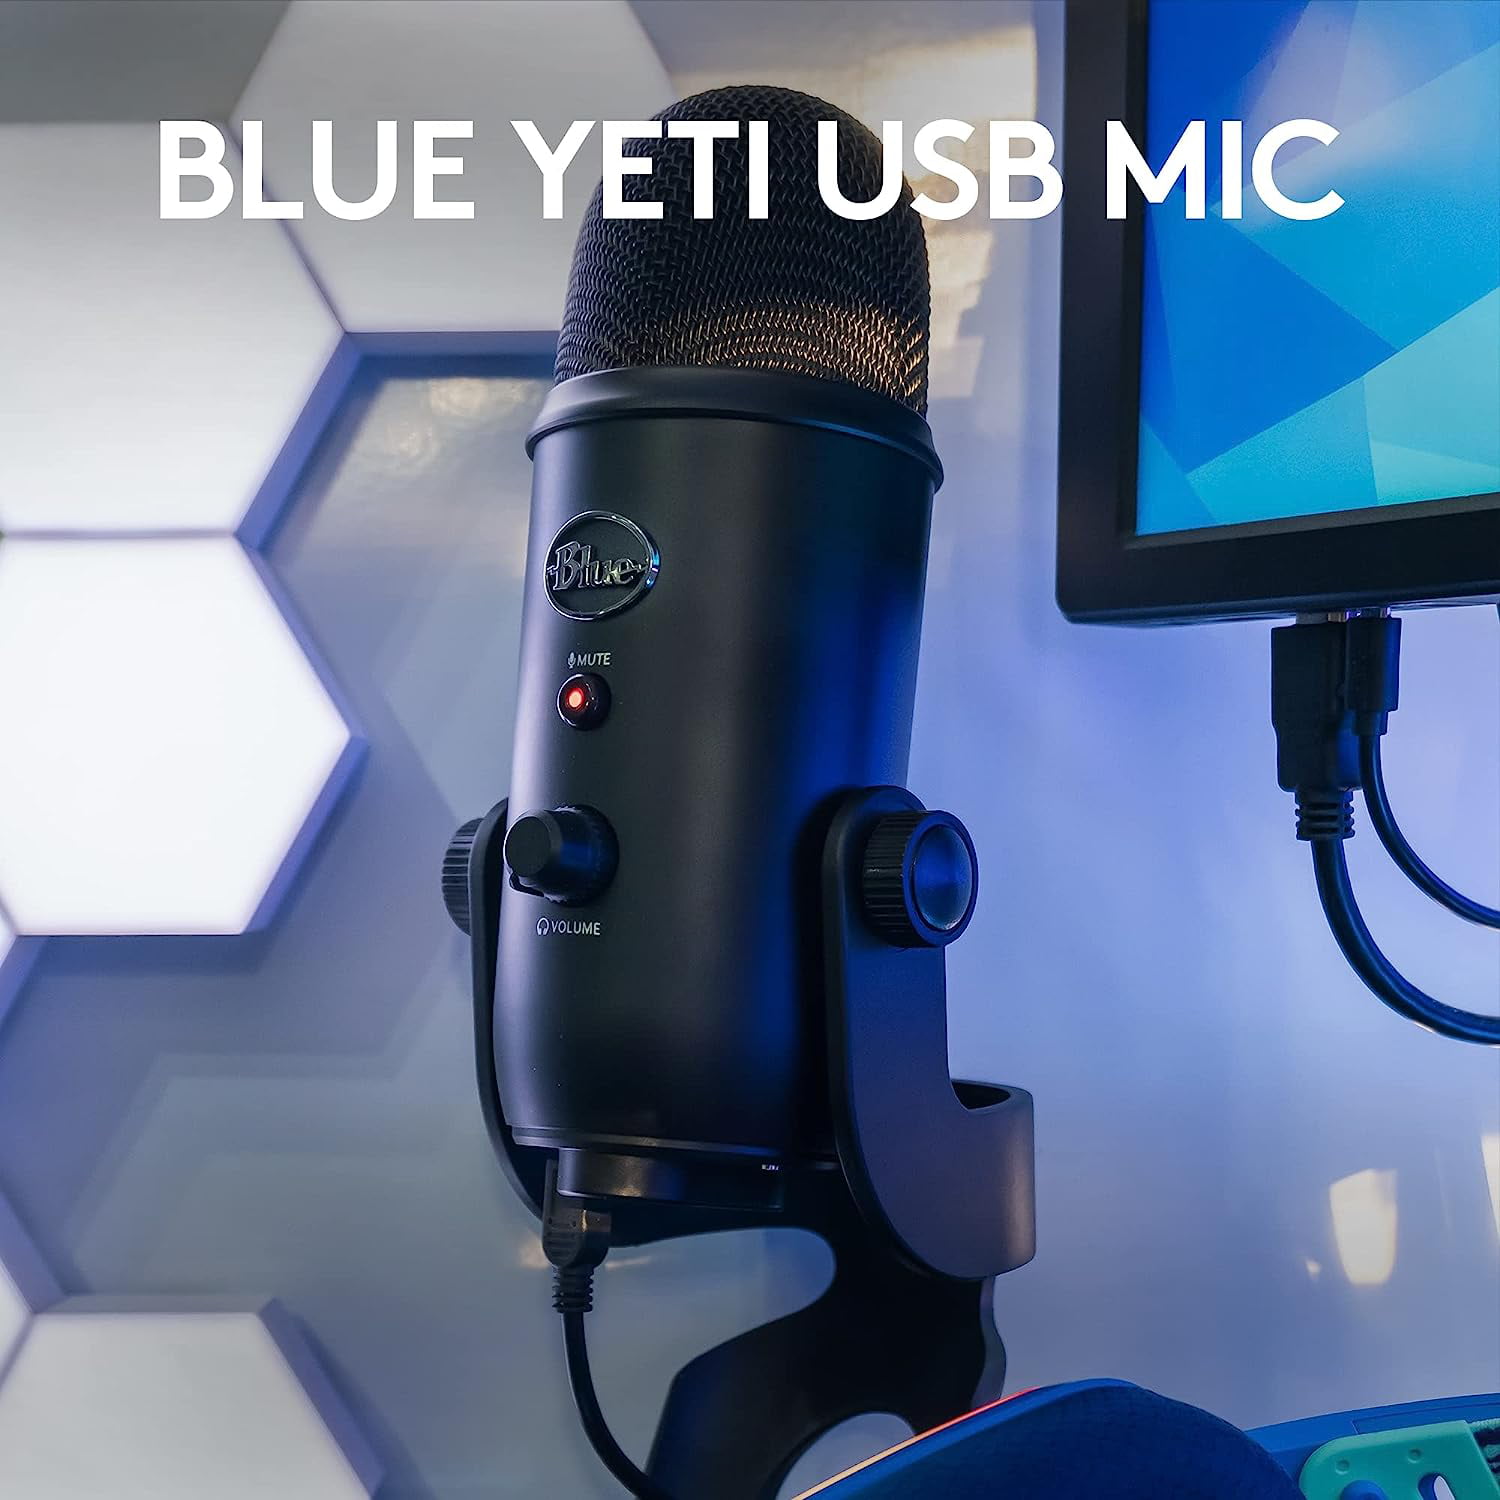 Logitech for Creators Blue Yeti USB Microphone for PC, Podcast, Gaming –